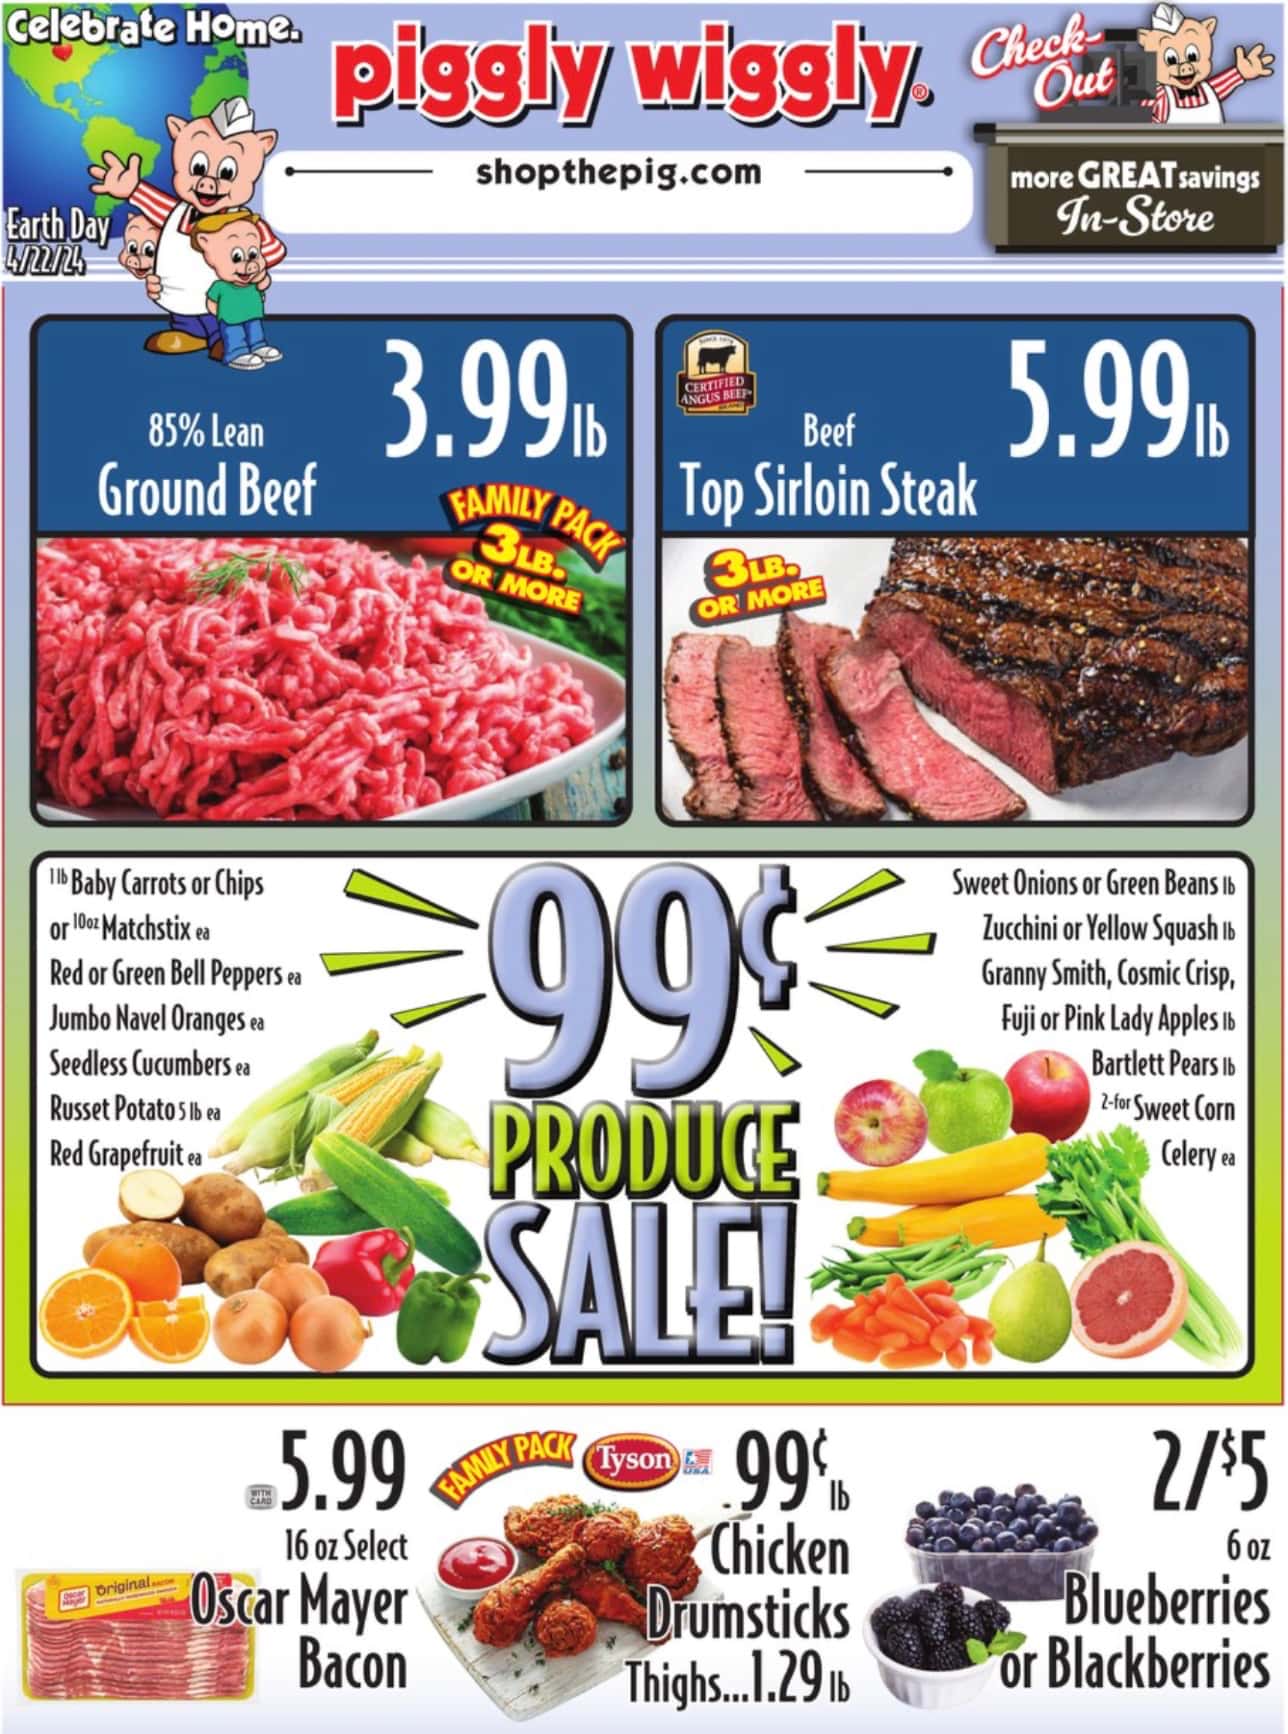 PigglyWiggly_weekly_ad_041724_01